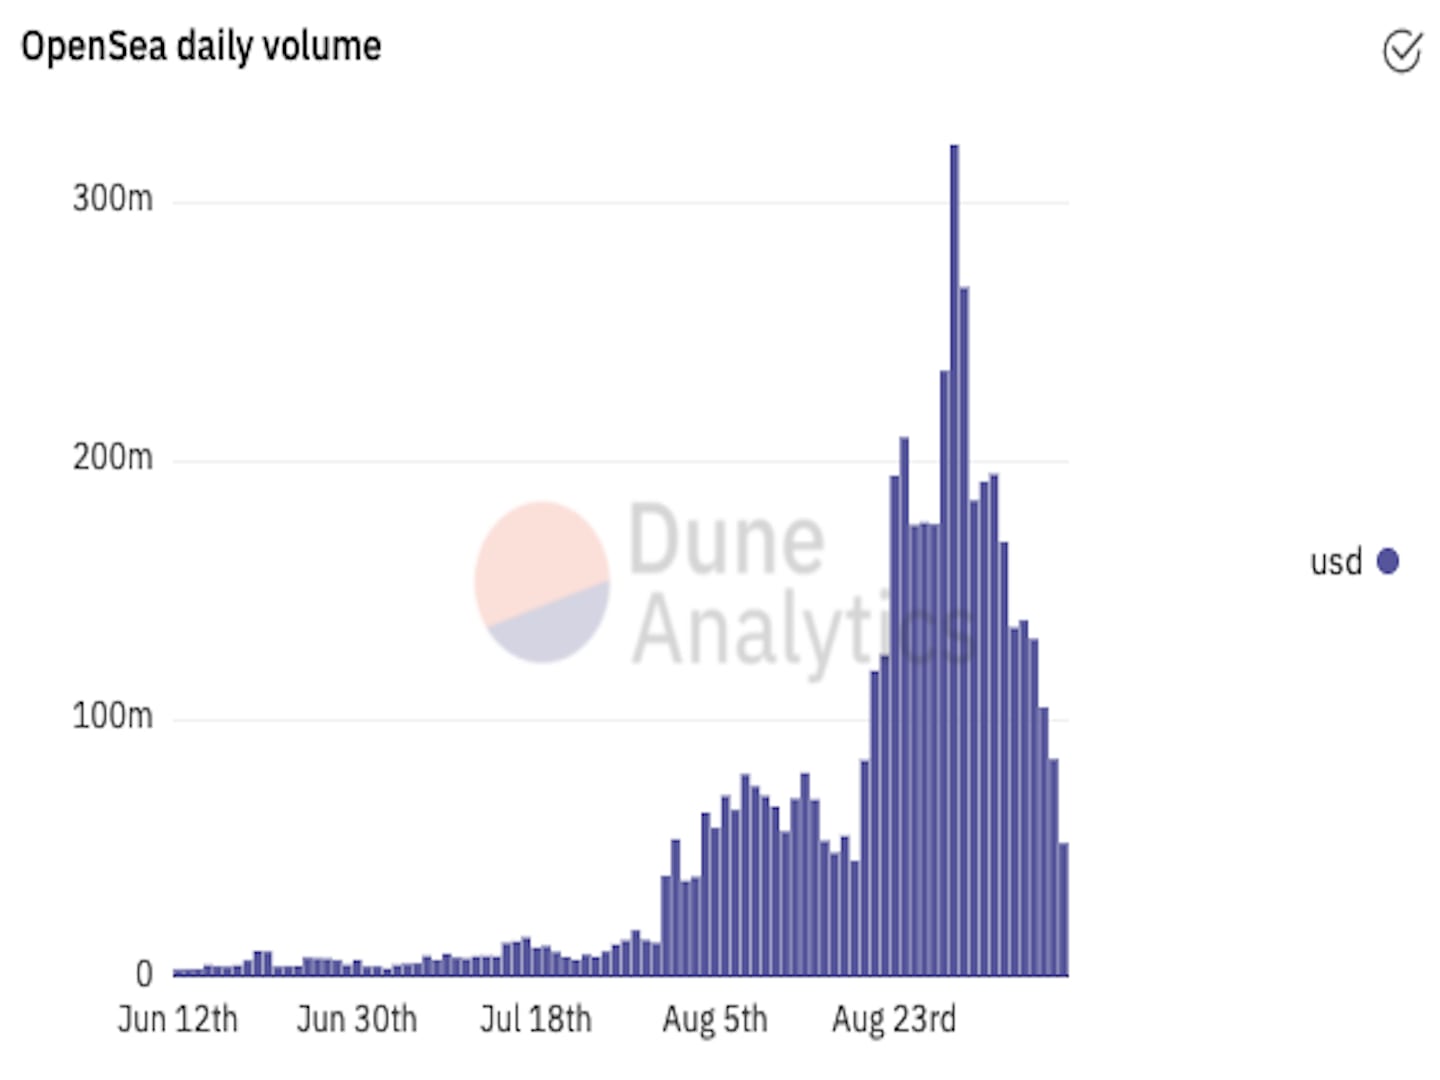 Dune-NFT Trading Volume. Queries for this post can be found at